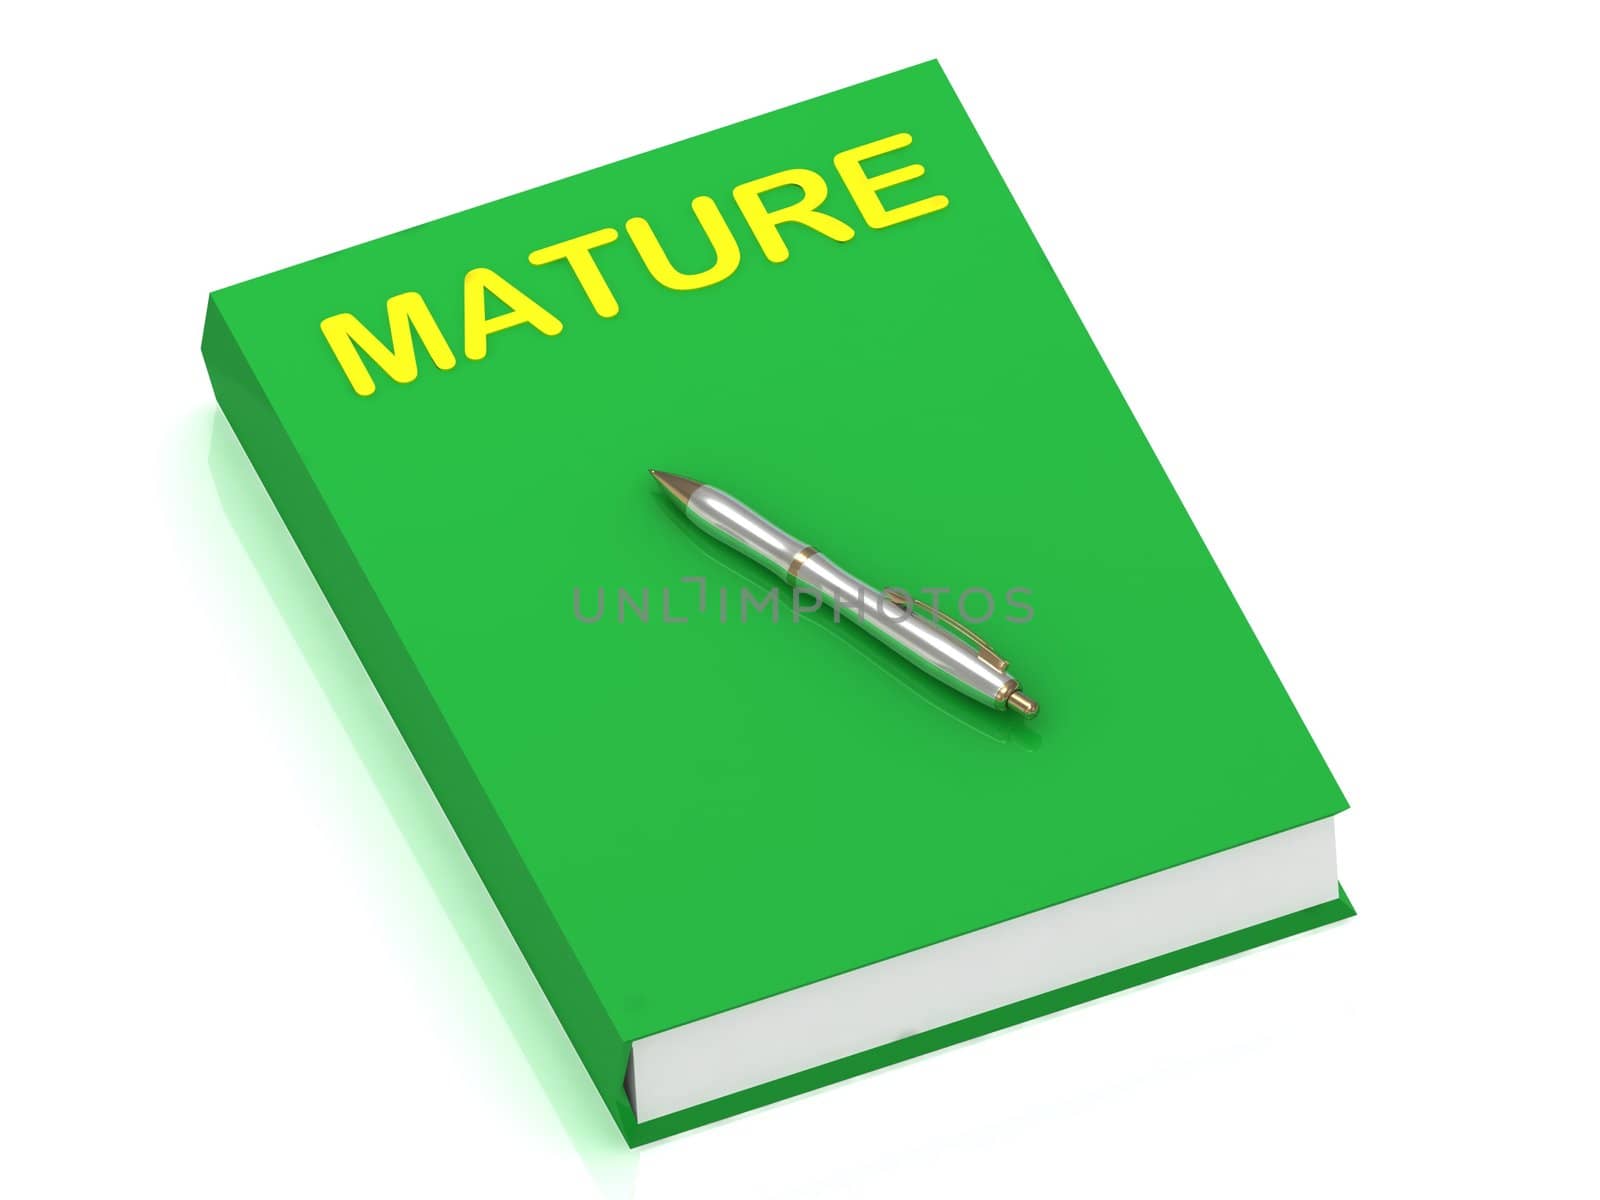 MATURE name on cover book by GreenMost